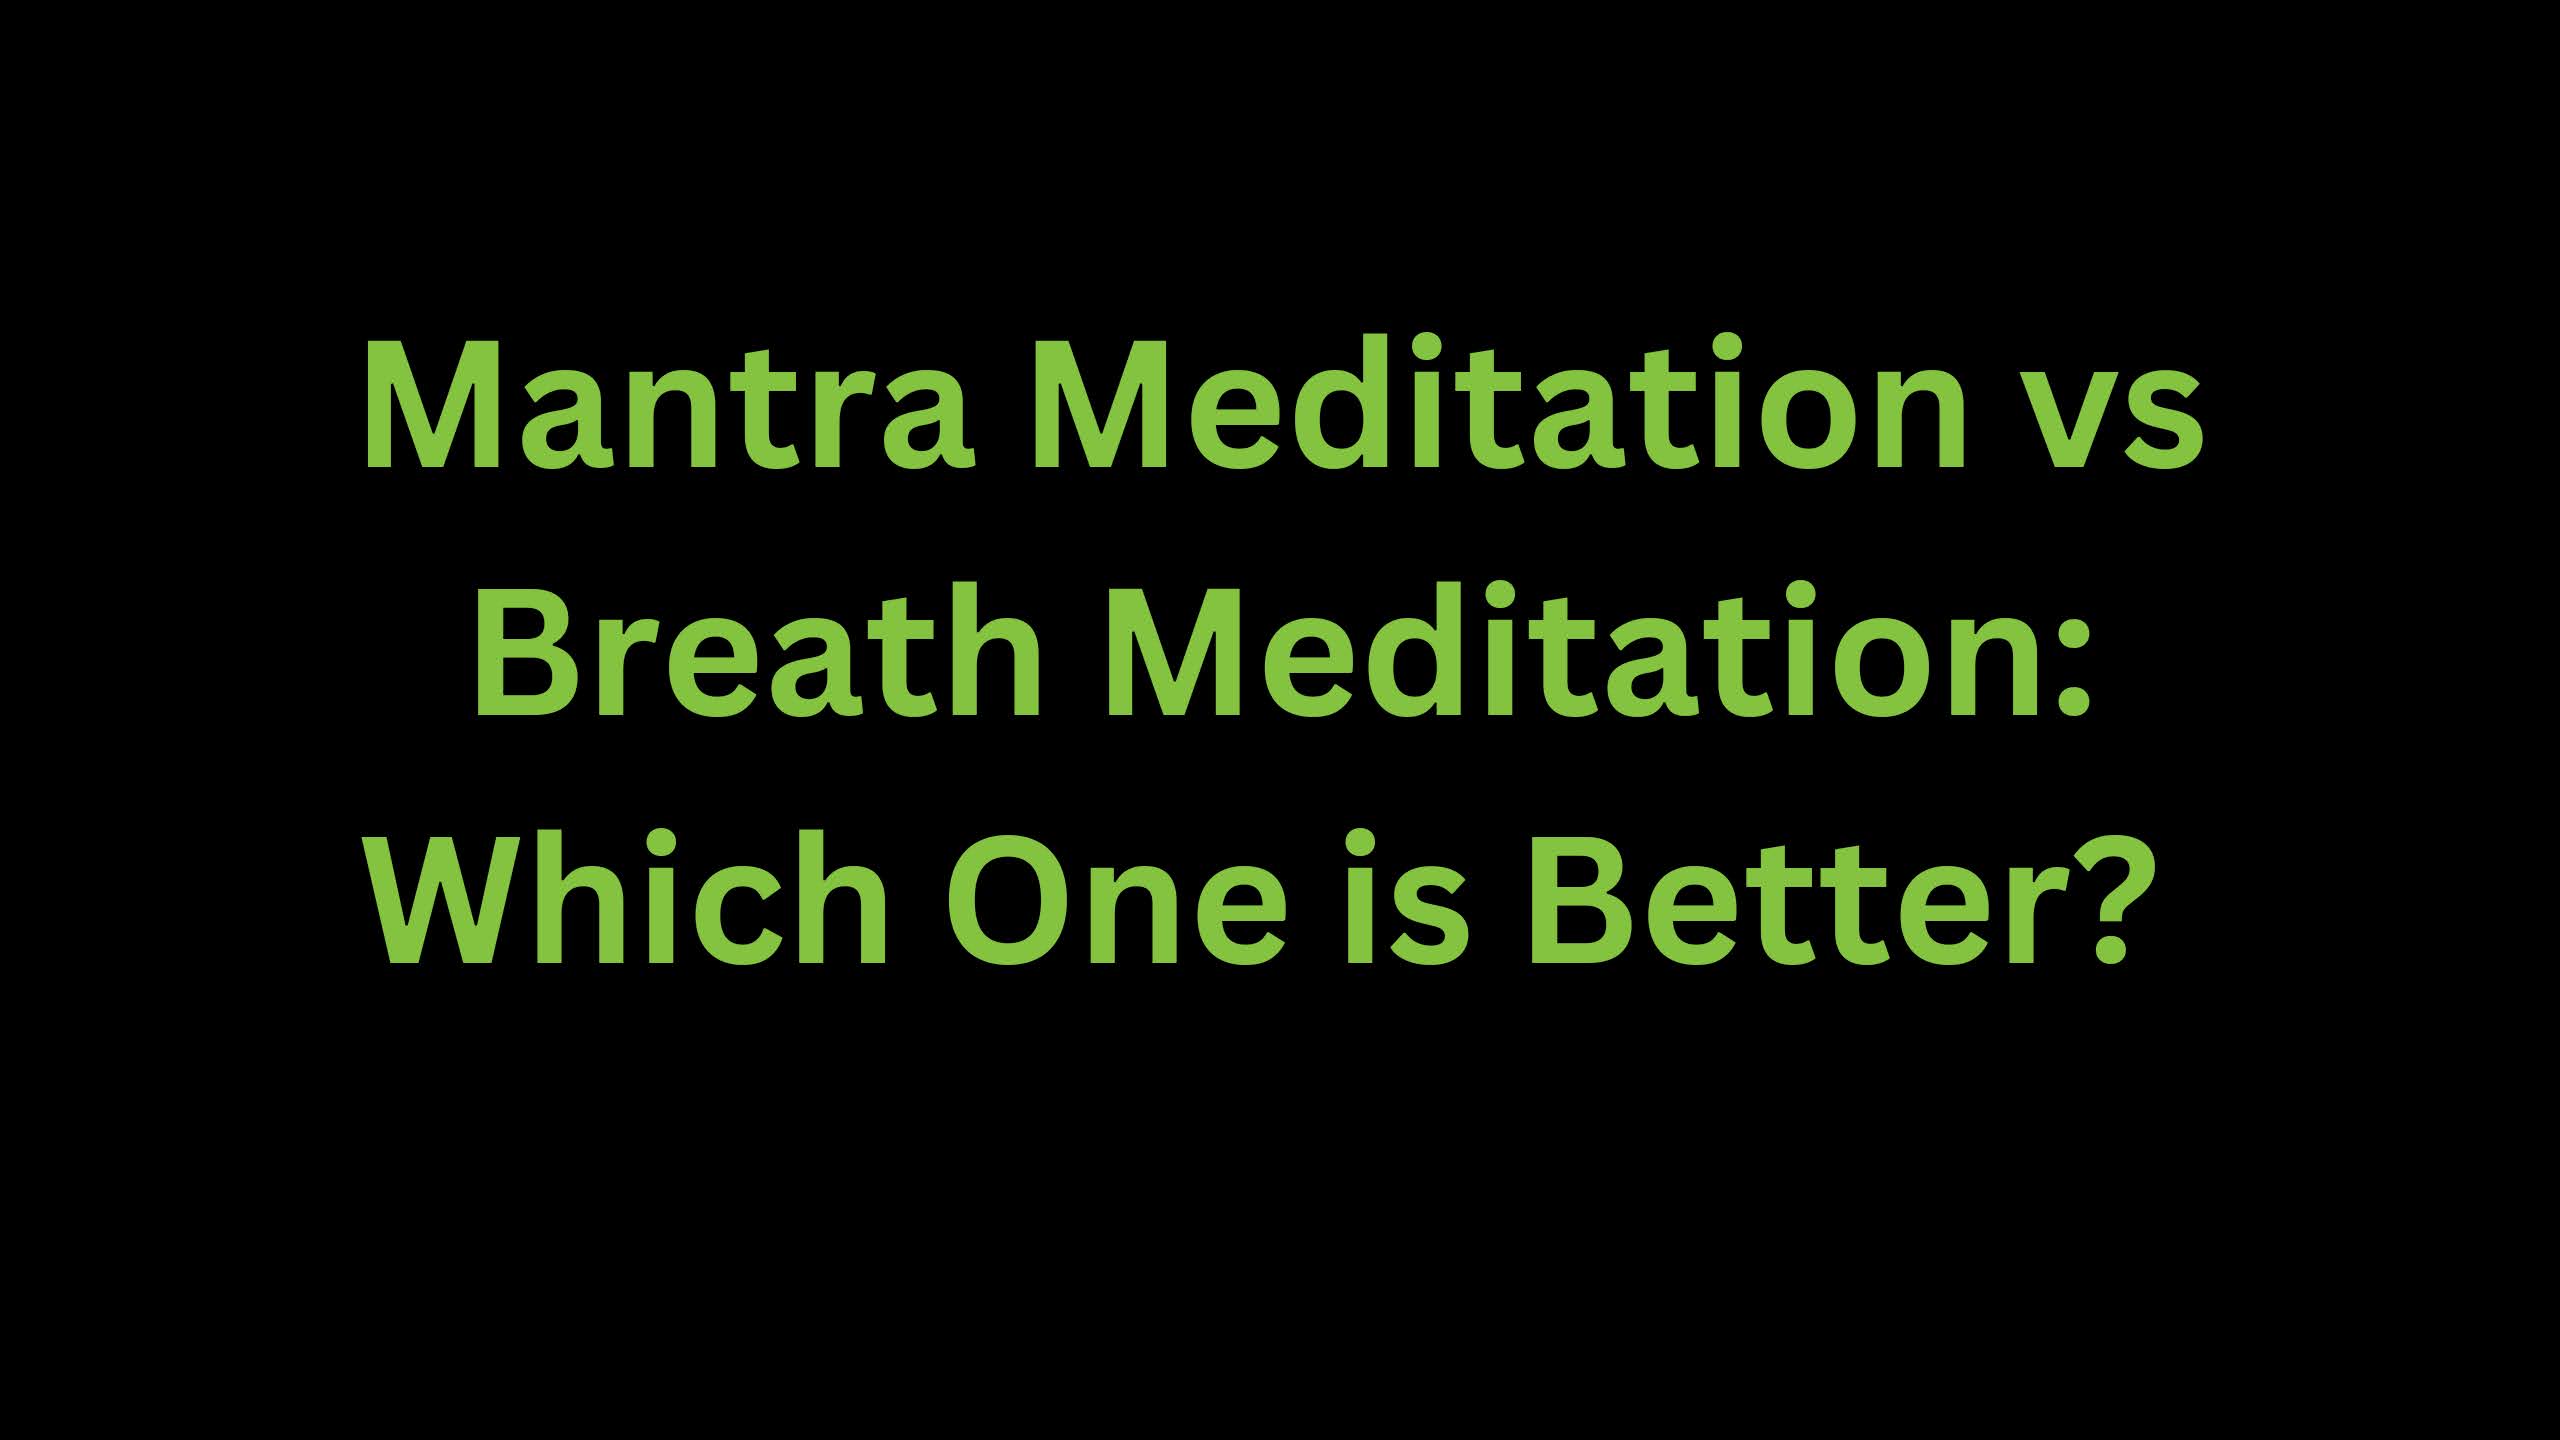 You are currently viewing Mantra Meditation vs Breath Meditation: Which One is Better?